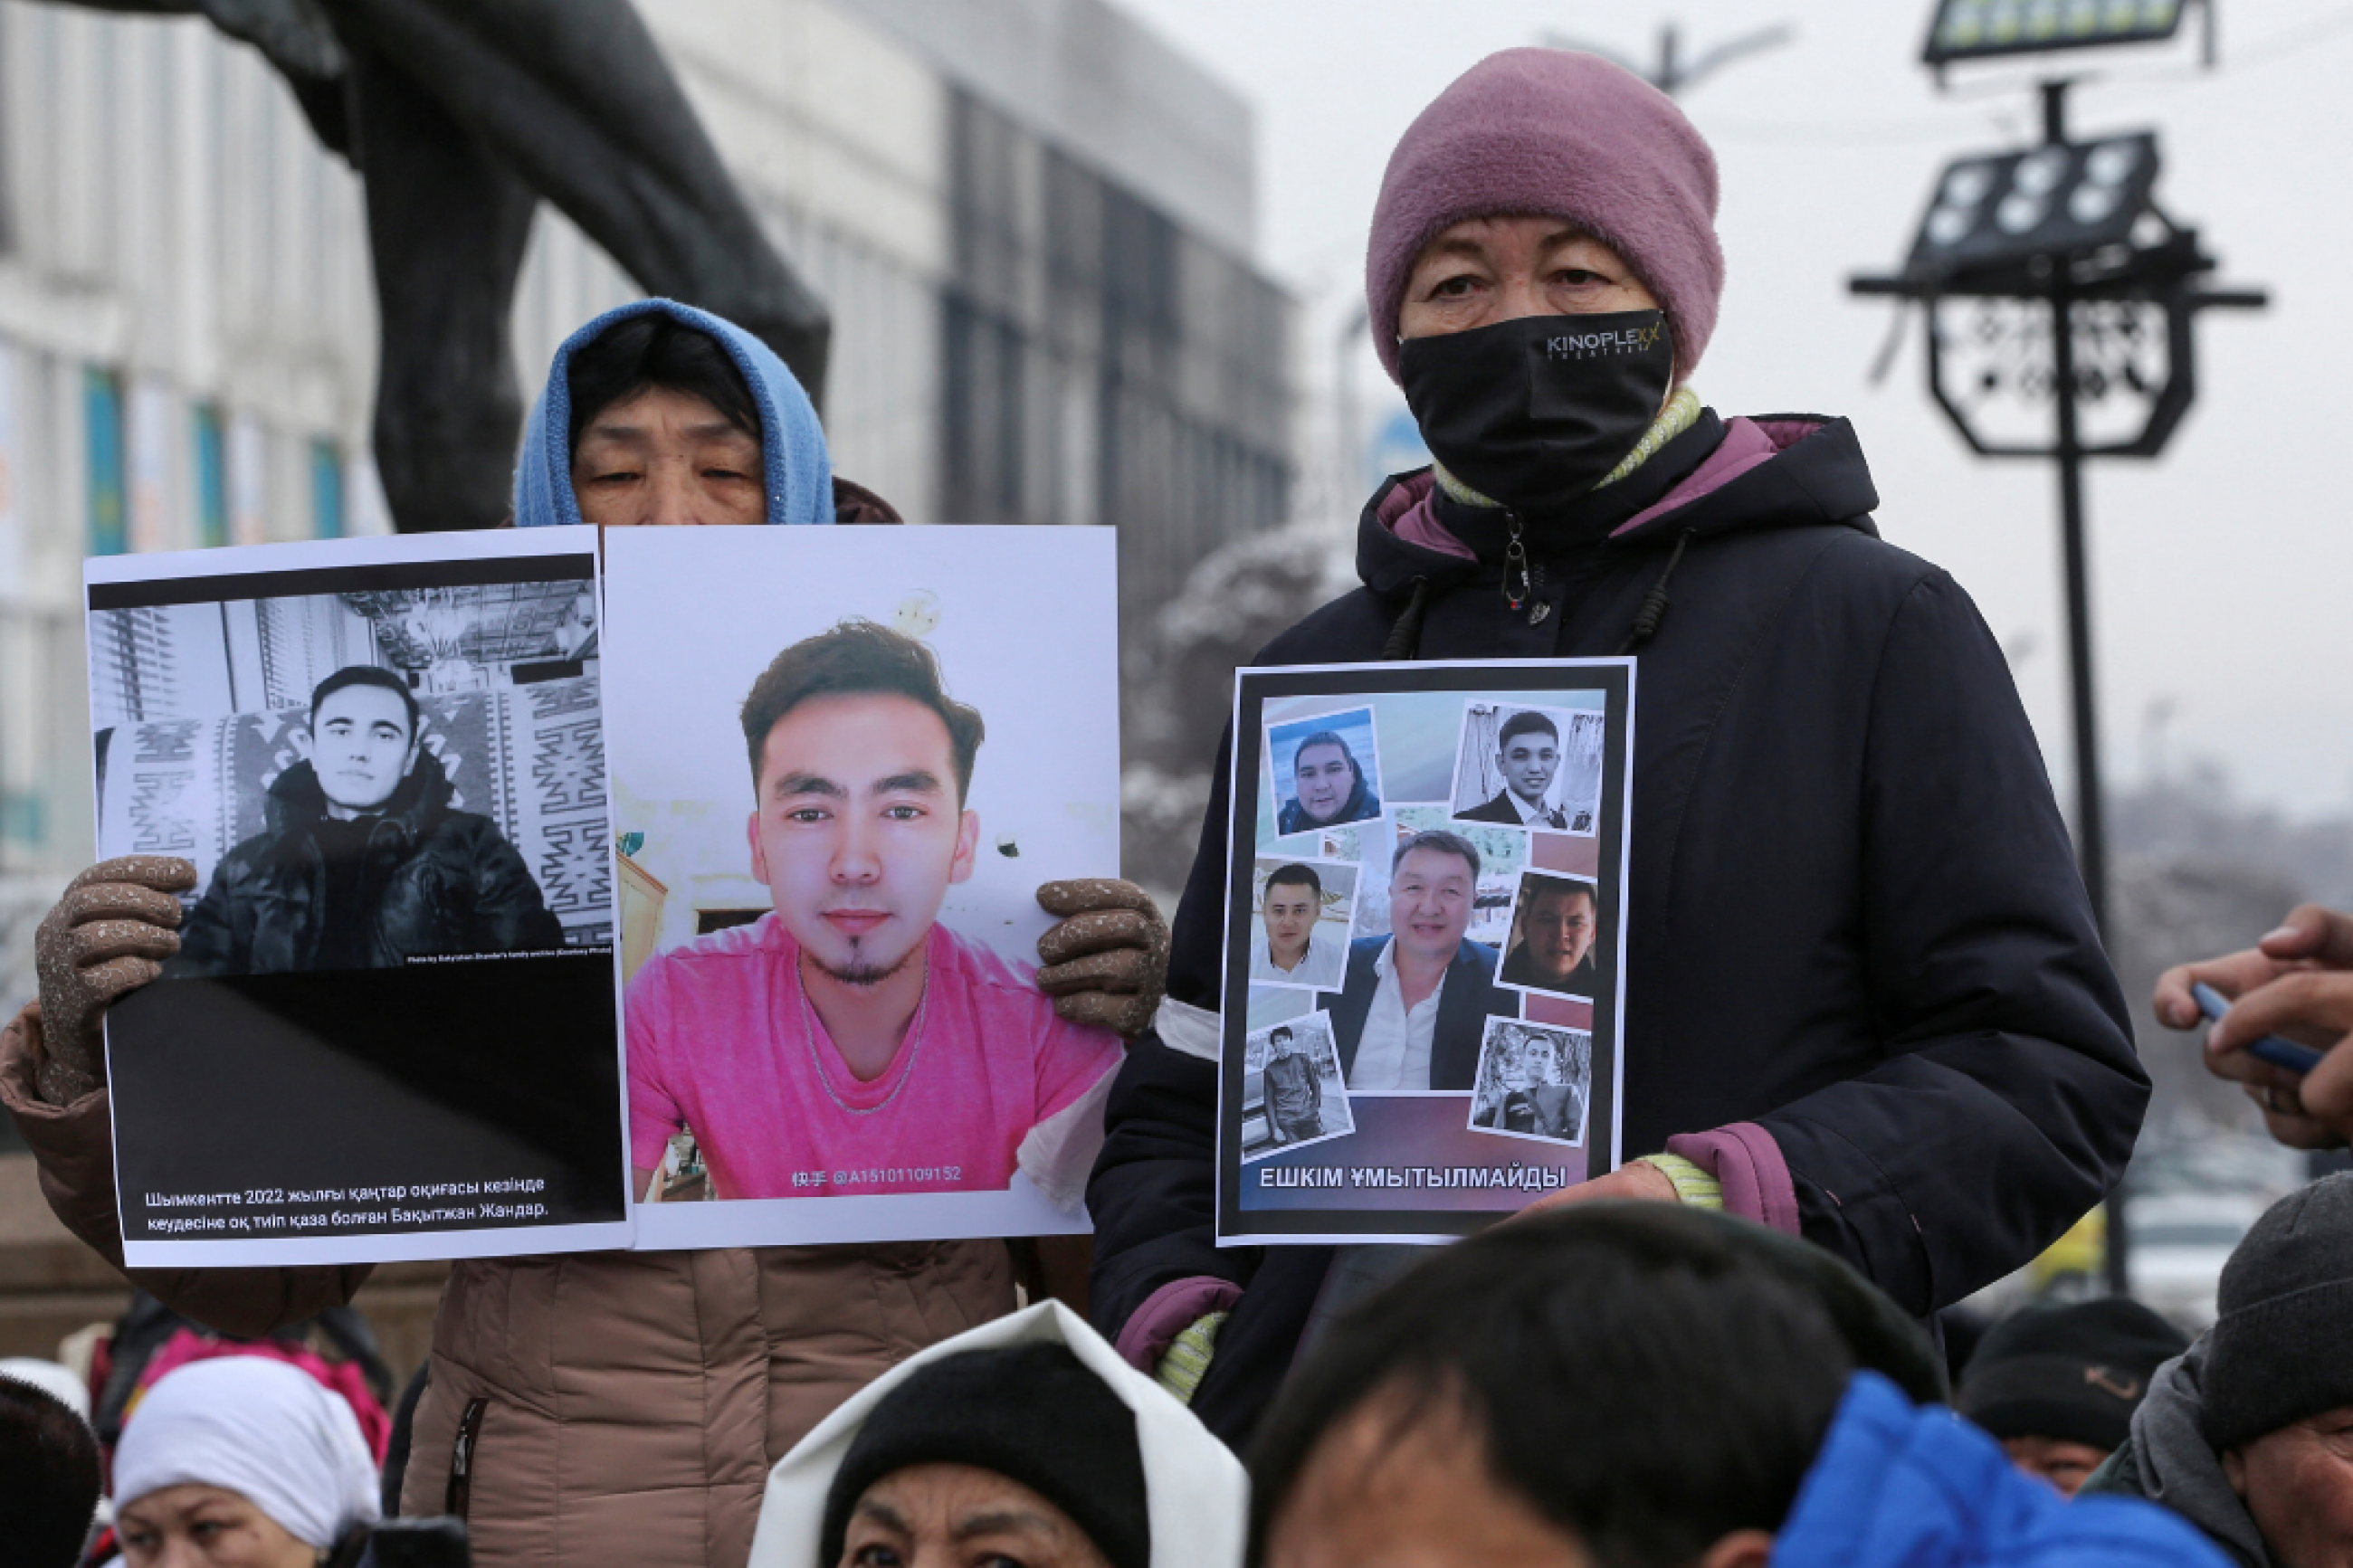 In Almaty, Kazakhstan, people hold a rally in memory of victims of the recent country-wide unrest triggered by fuel price increases, on February 13, 2022.